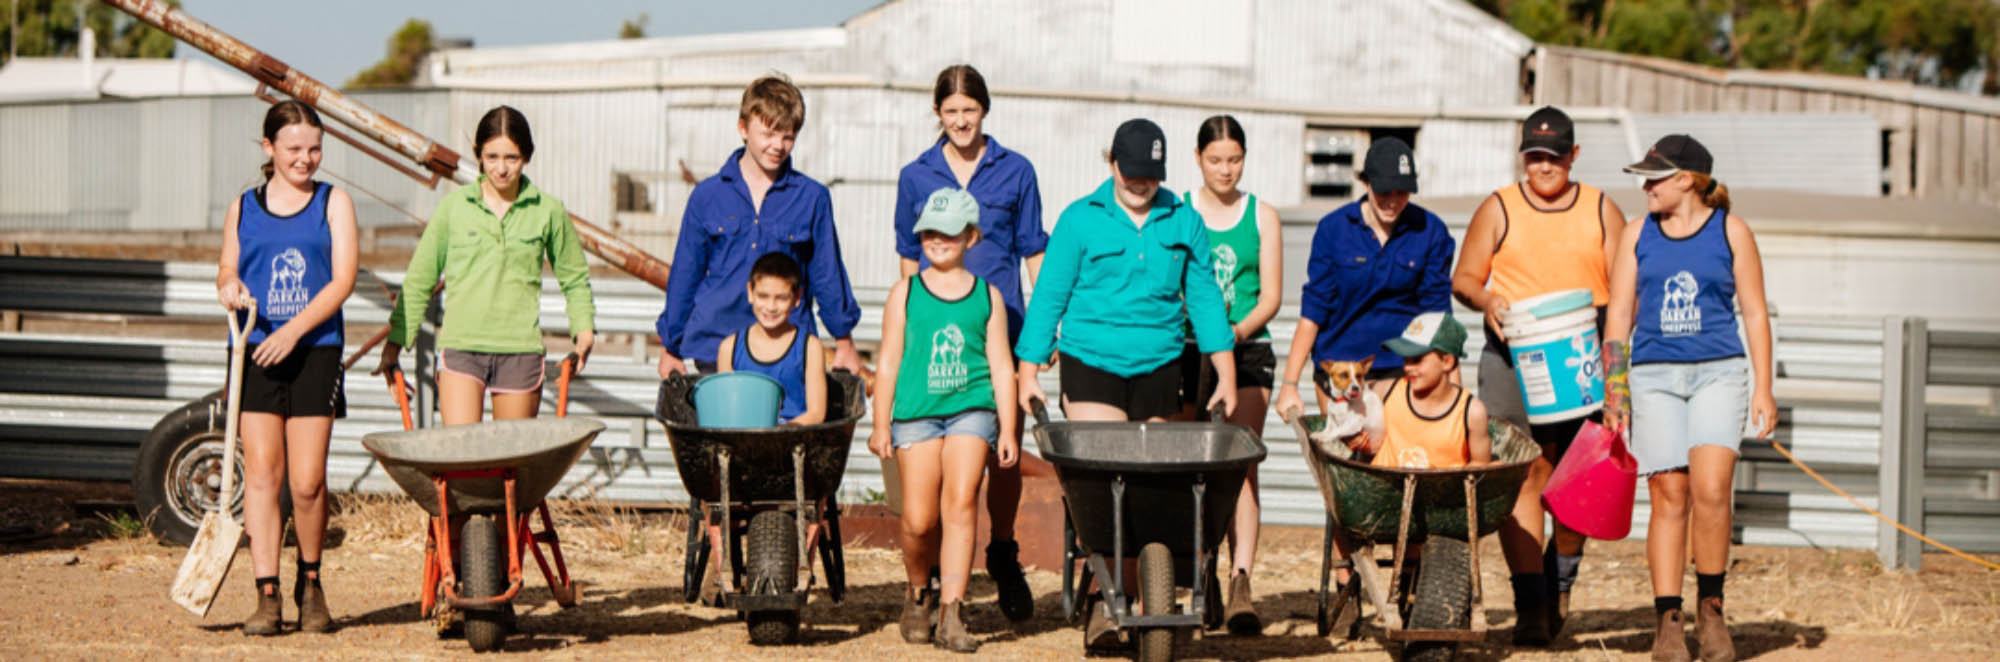 photo of a group of adults and children in colourful farm shirts with wheelbarrows for collecting sheep poo